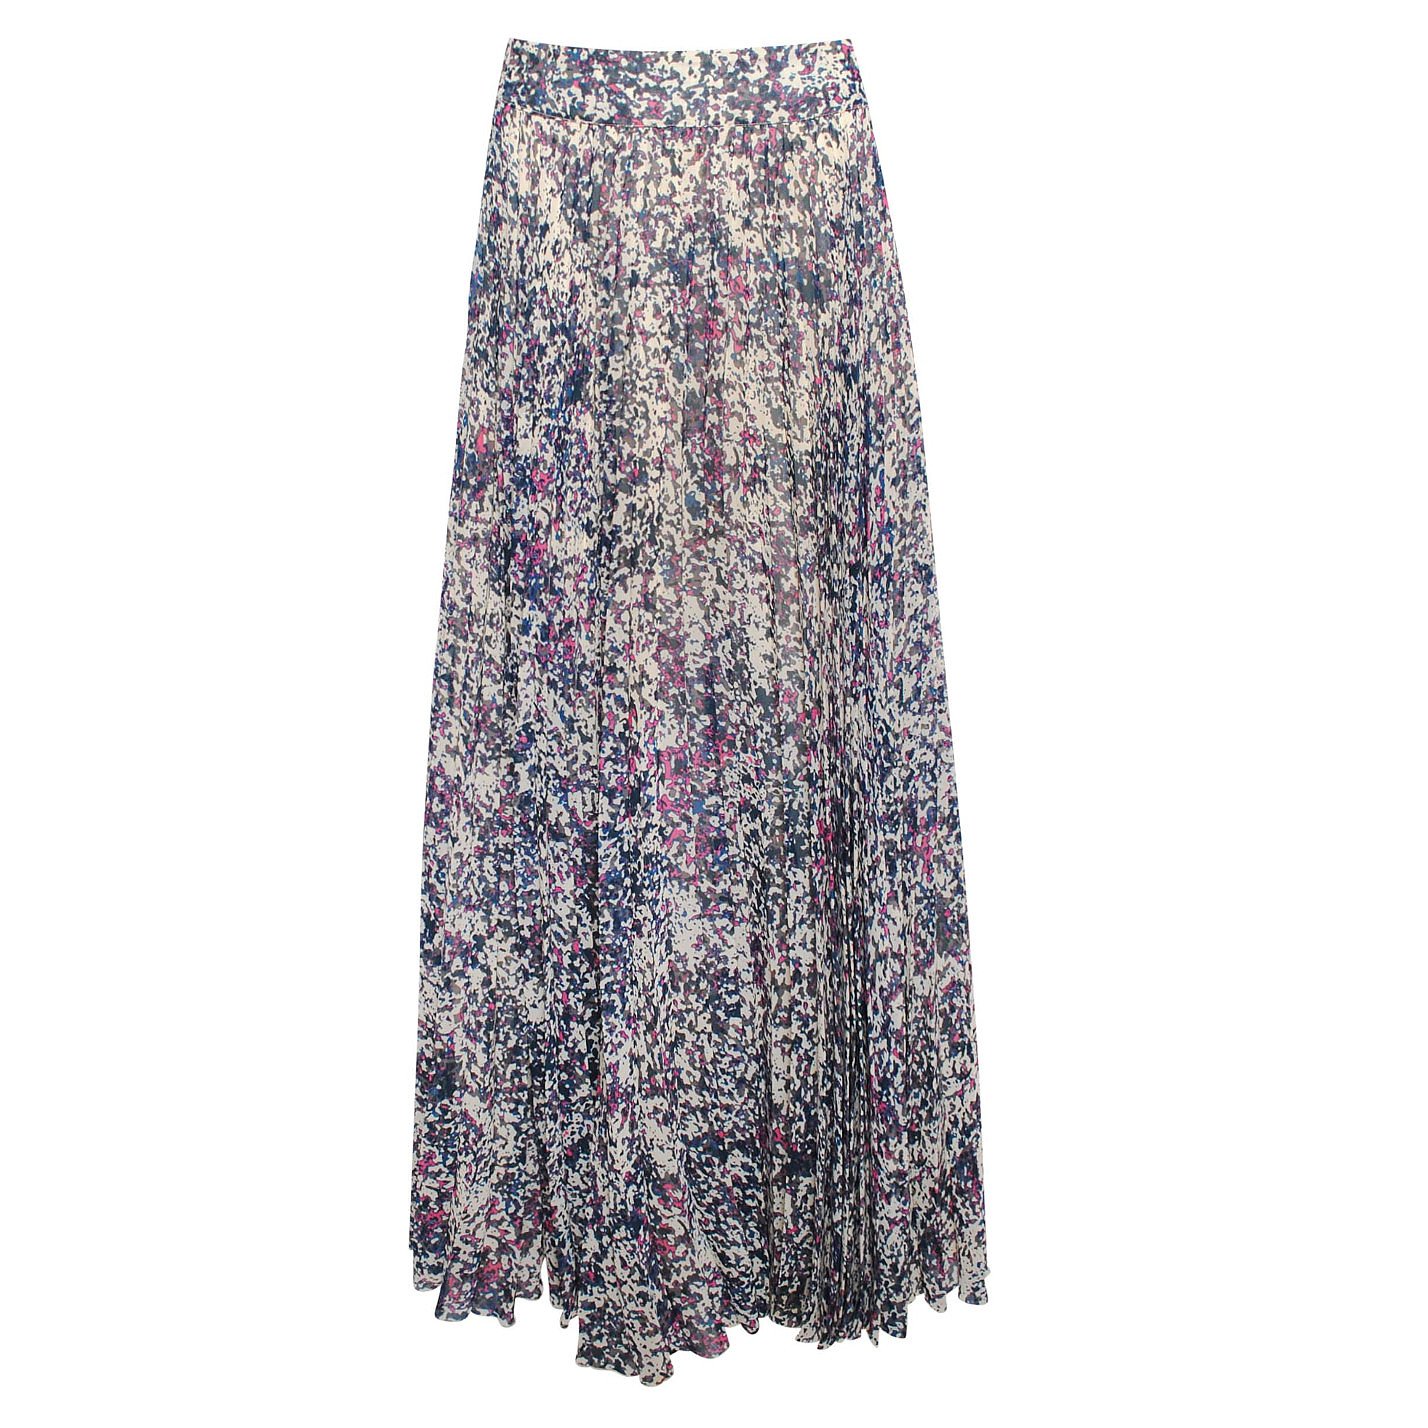 Anthropologie Abstract Print Pleated Maxi Skirt